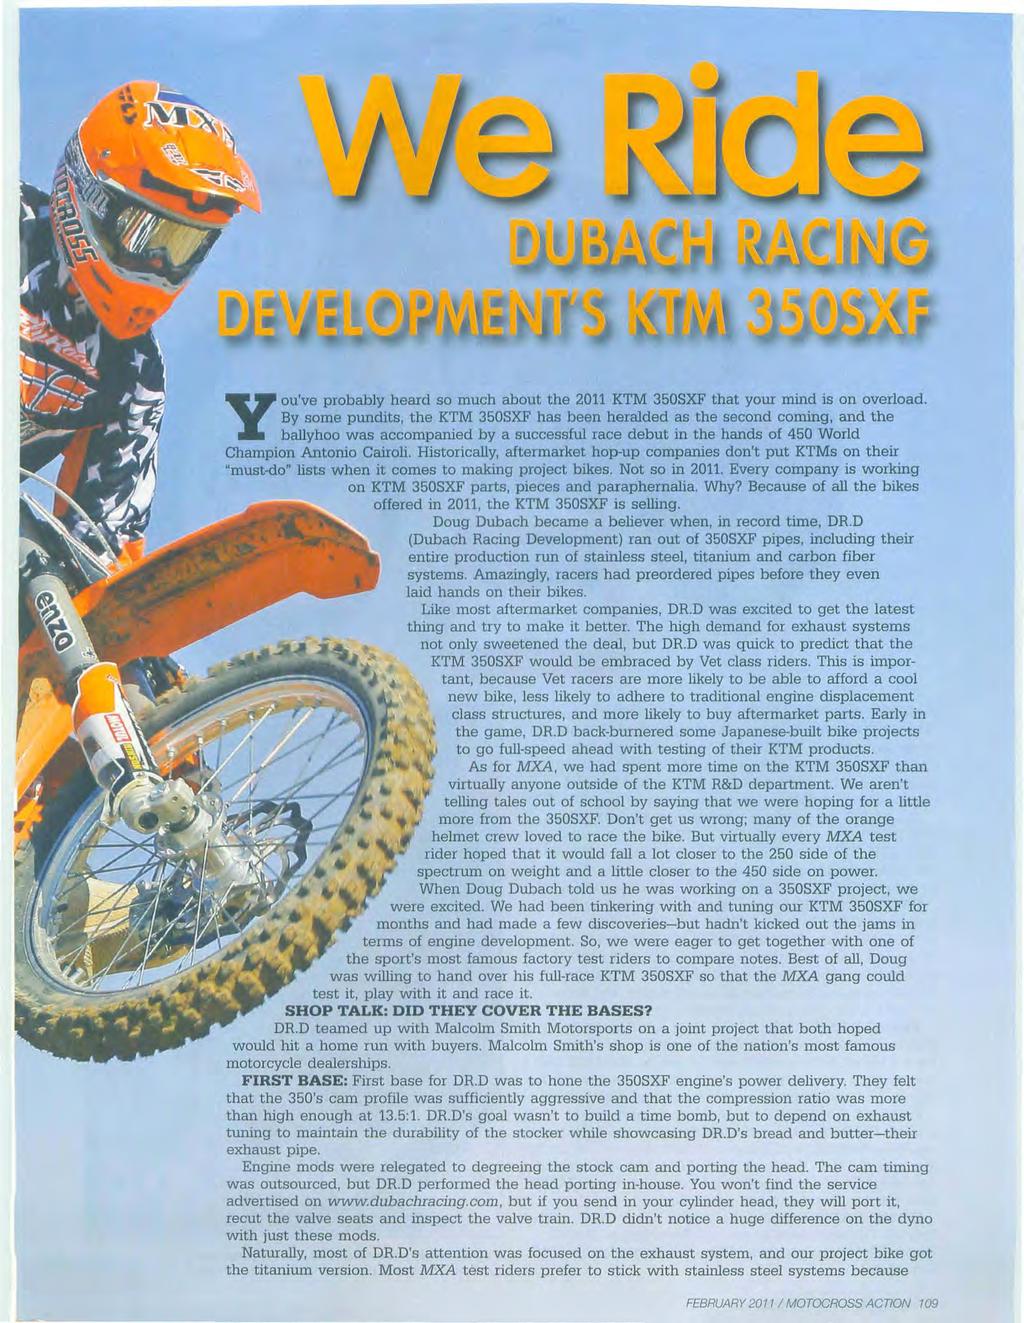 Y ou've probably heard so much about the 2011 KTM 350SXF that your mind is on overload.